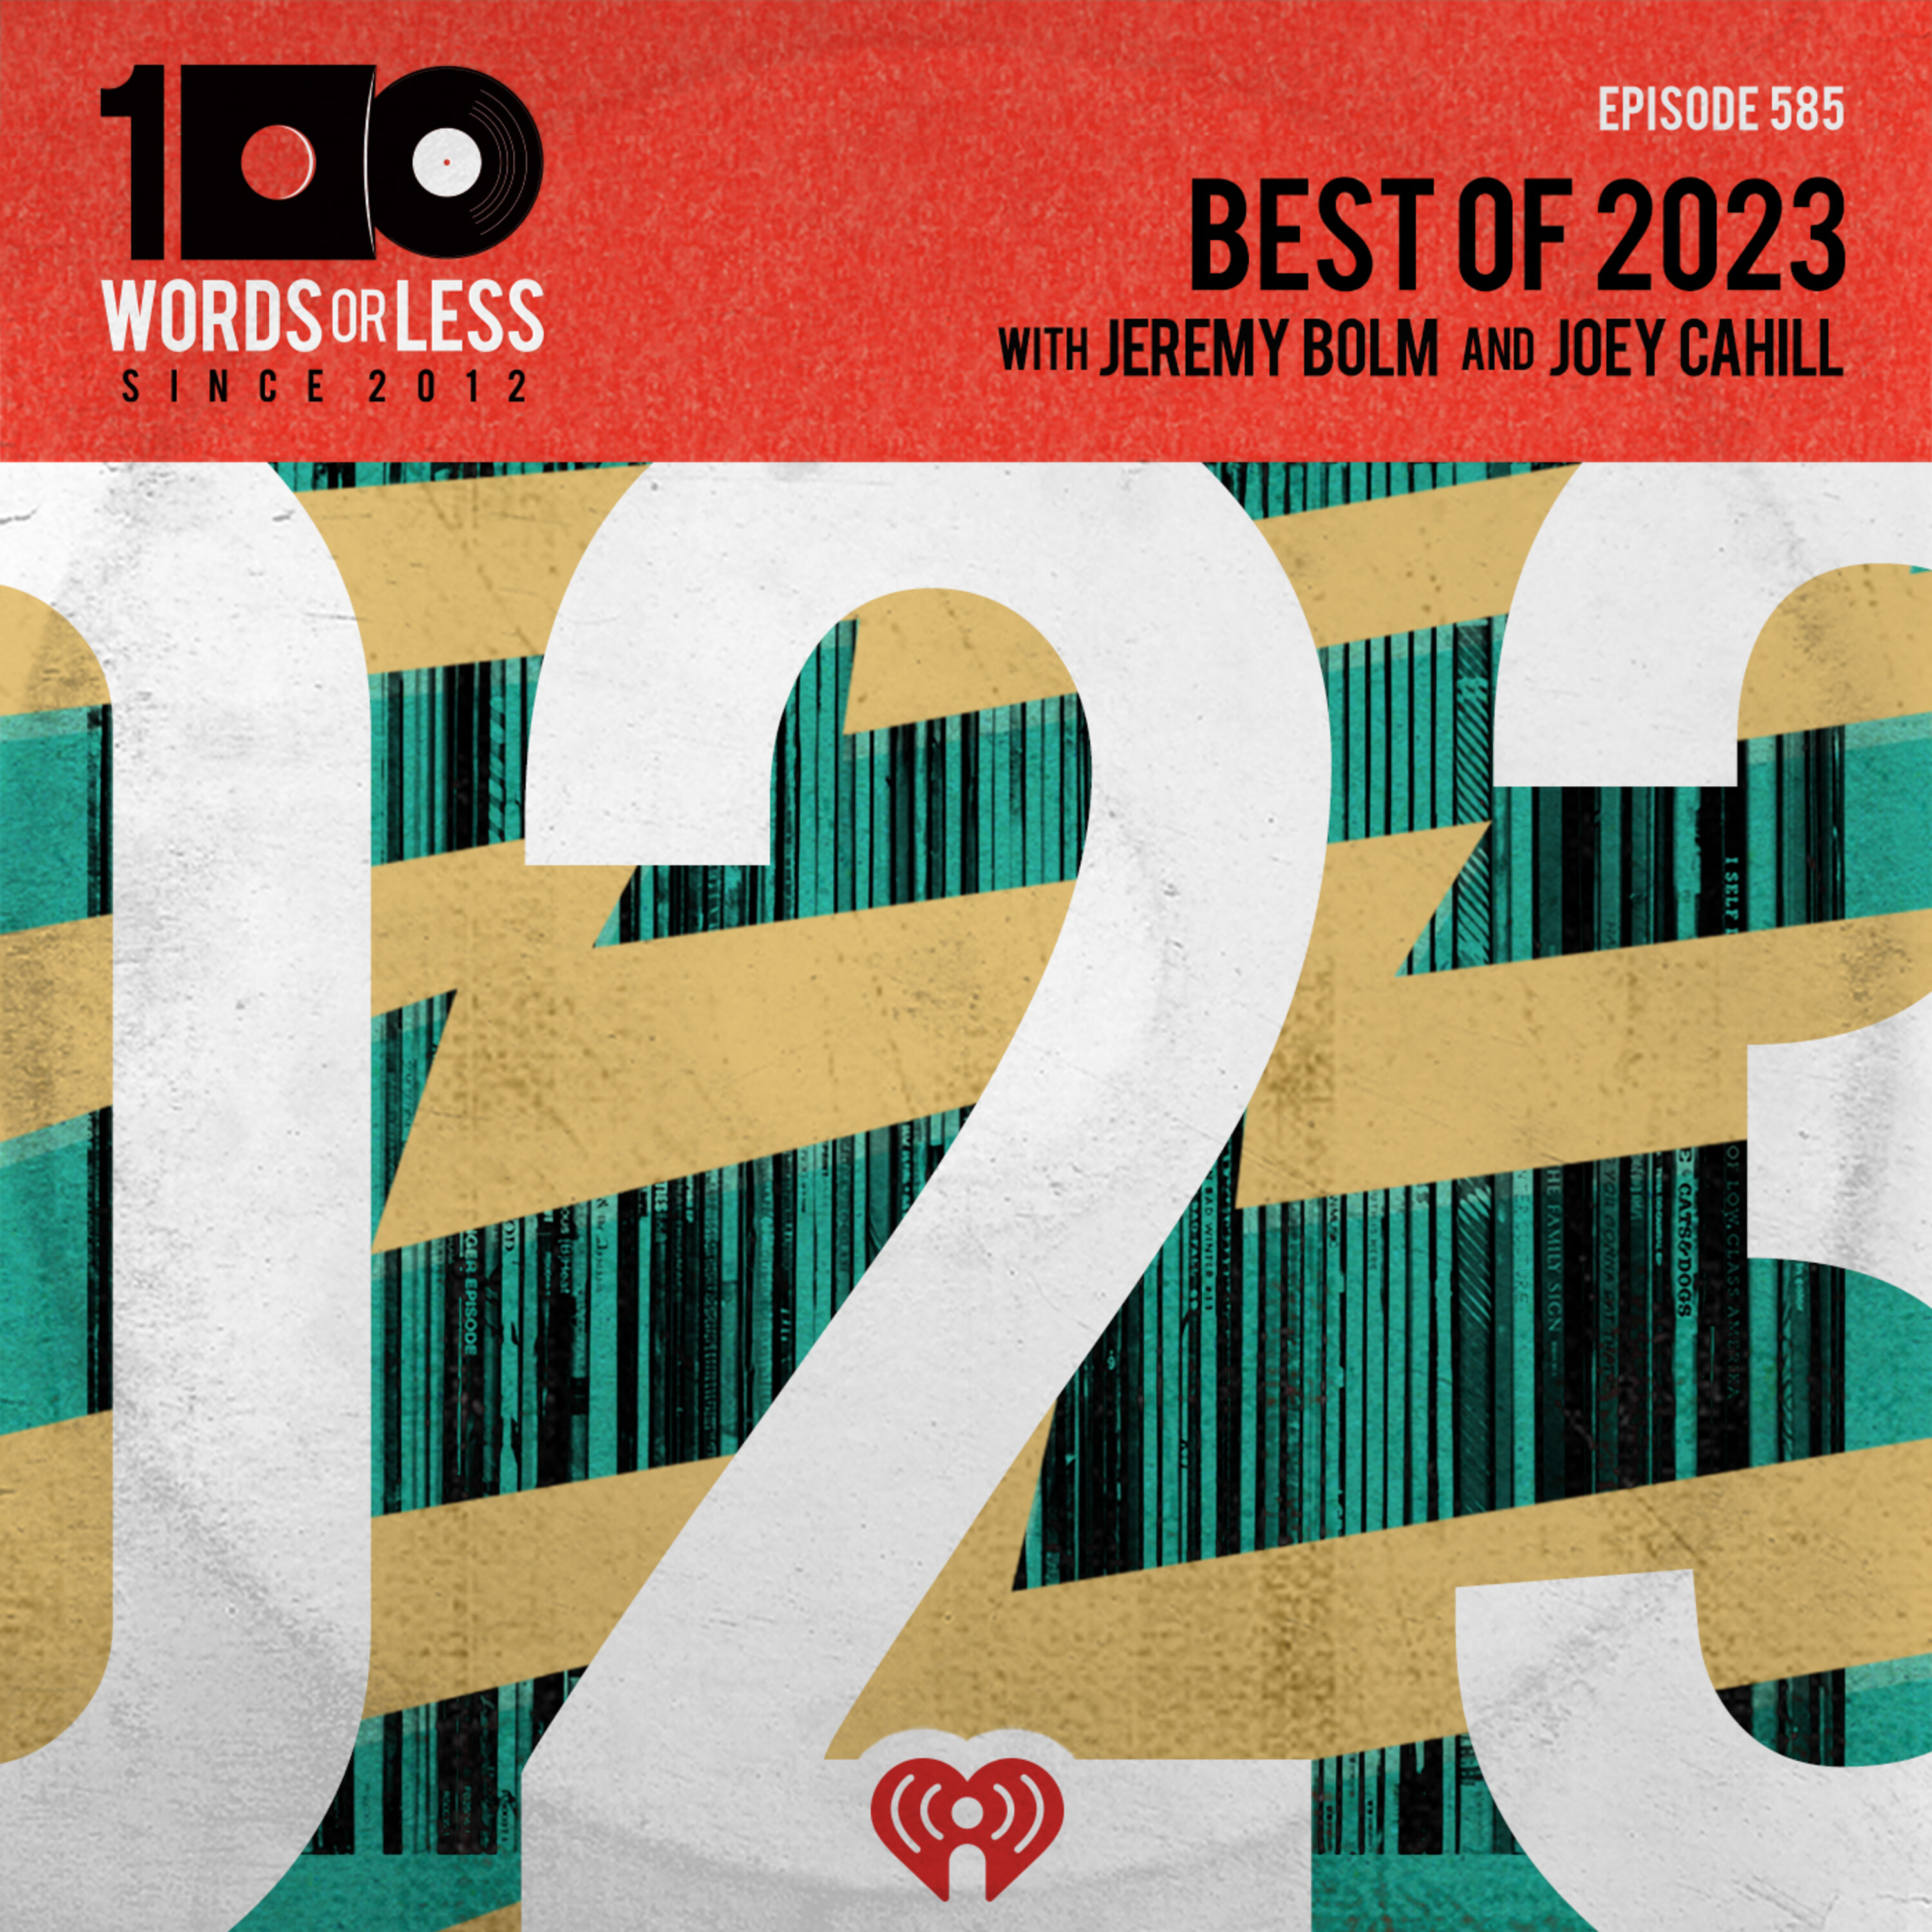 Best of 2023 w/ Joey Cahill and Jeremy Bolm